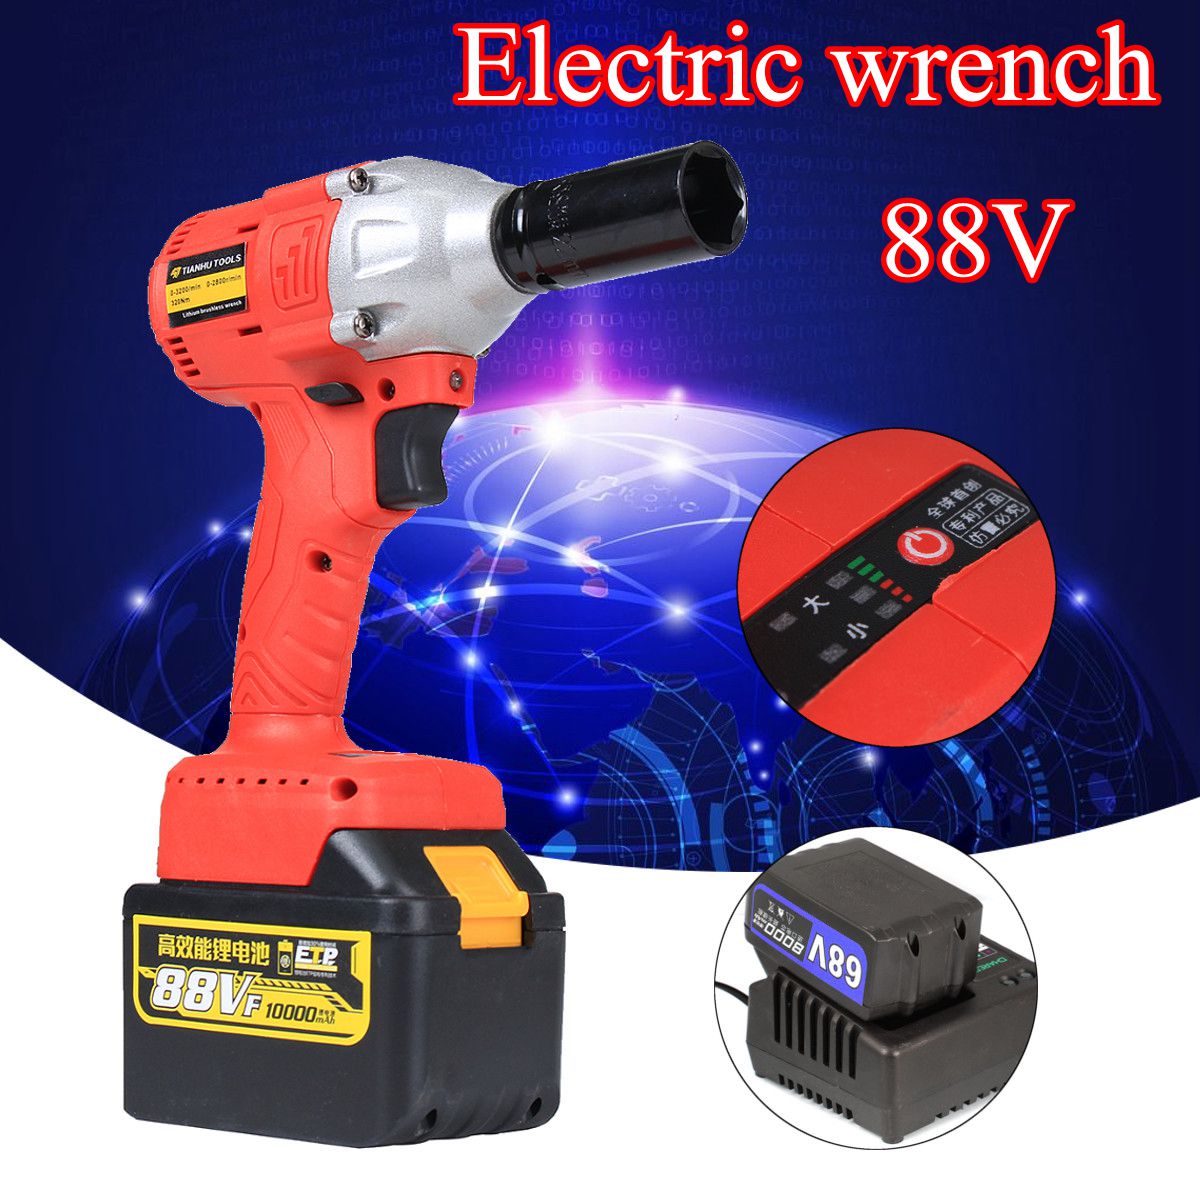 88V-10000mAH-110V-220V-Electric-Wrench-Lithium-Ion-Drive-Cordless-Power-Wrench-320Nm-Torque-1262268-1